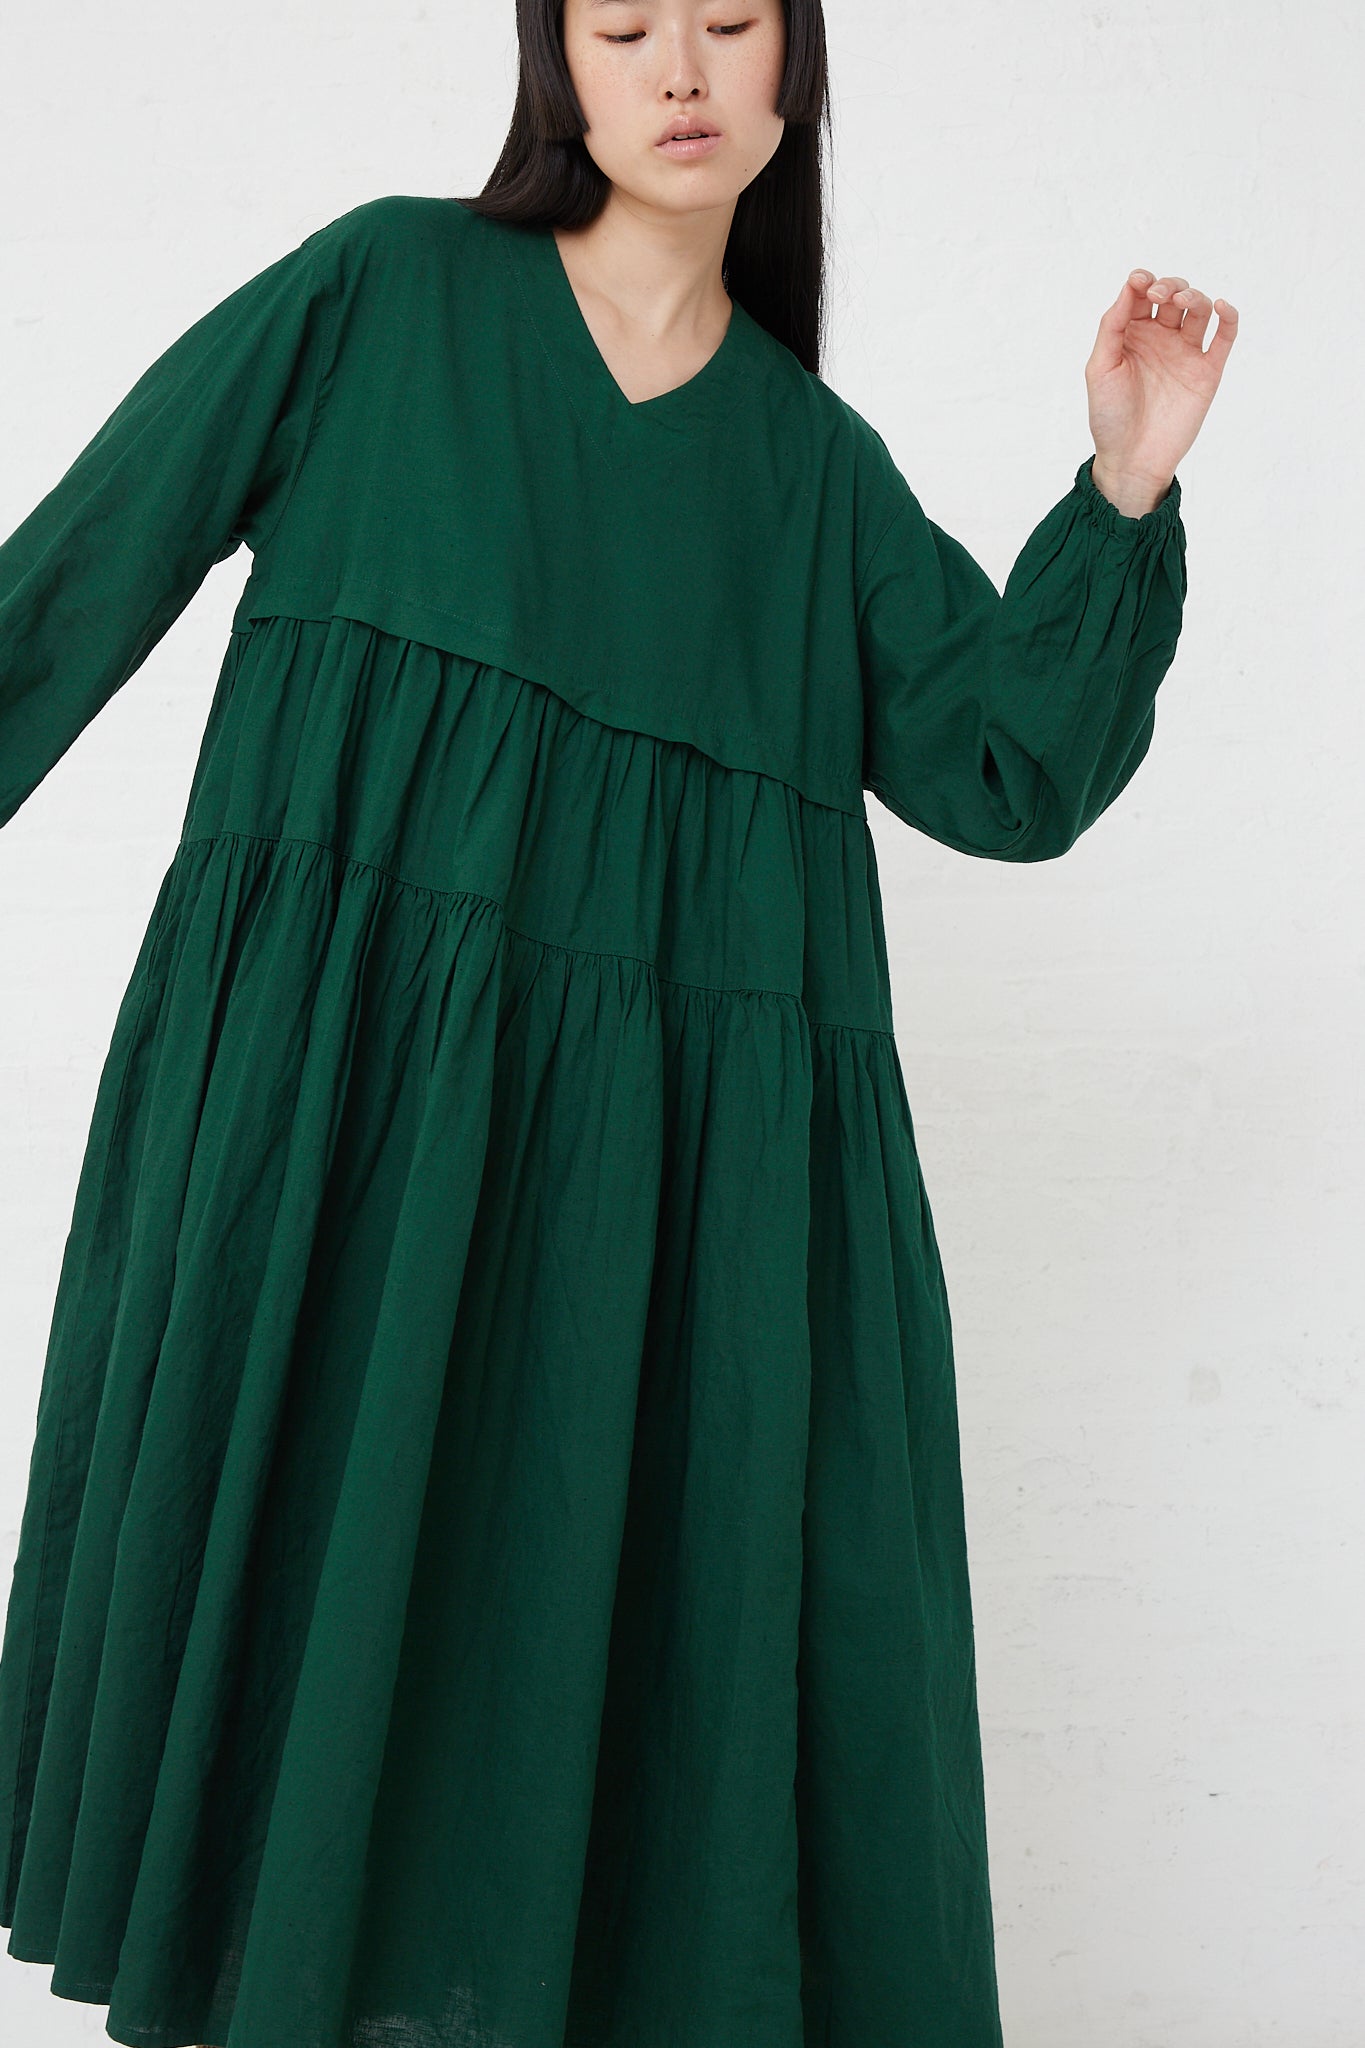 The model is wearing an UpcycleLino Linen Tiered Gather Dress in Green with ruffles made from linen by nest Robe.